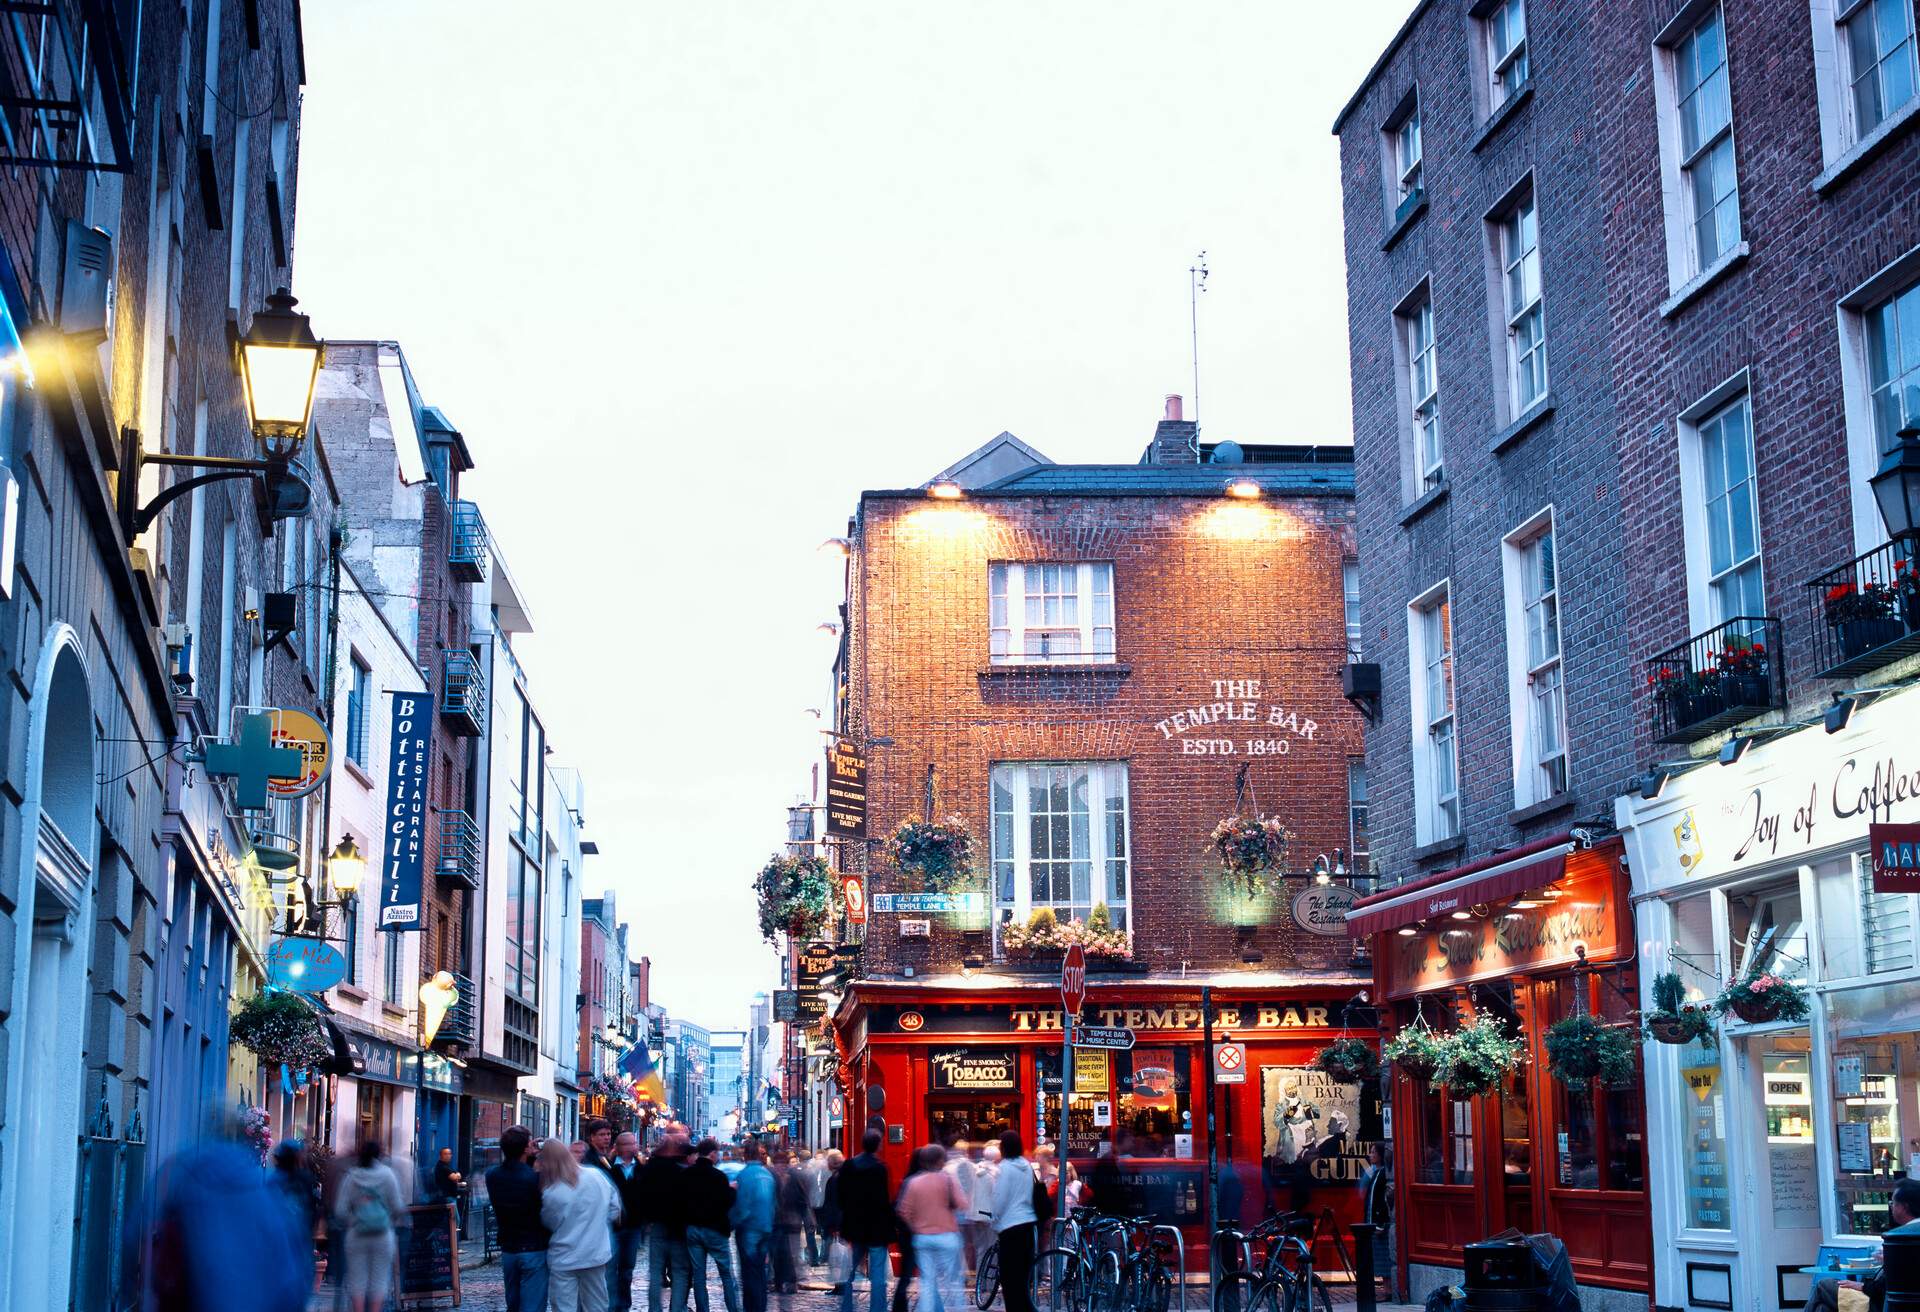 A crowded cobblestone lane lined with quaint shops and the famous Temple Bar.